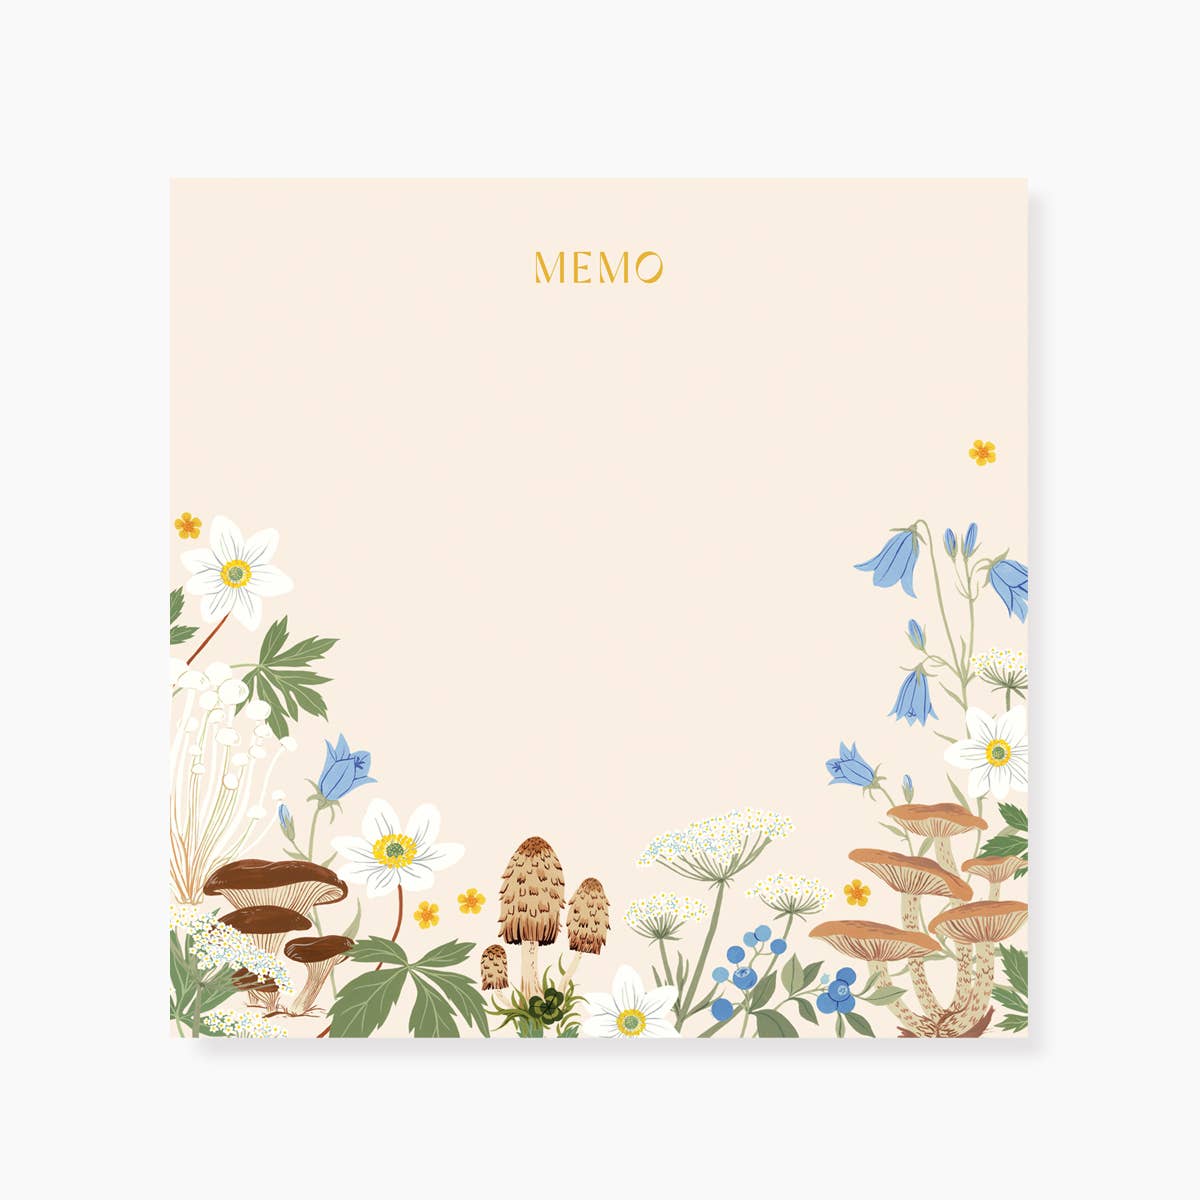 Blank memo pad with mushrooms and flowers bordering the bottom 